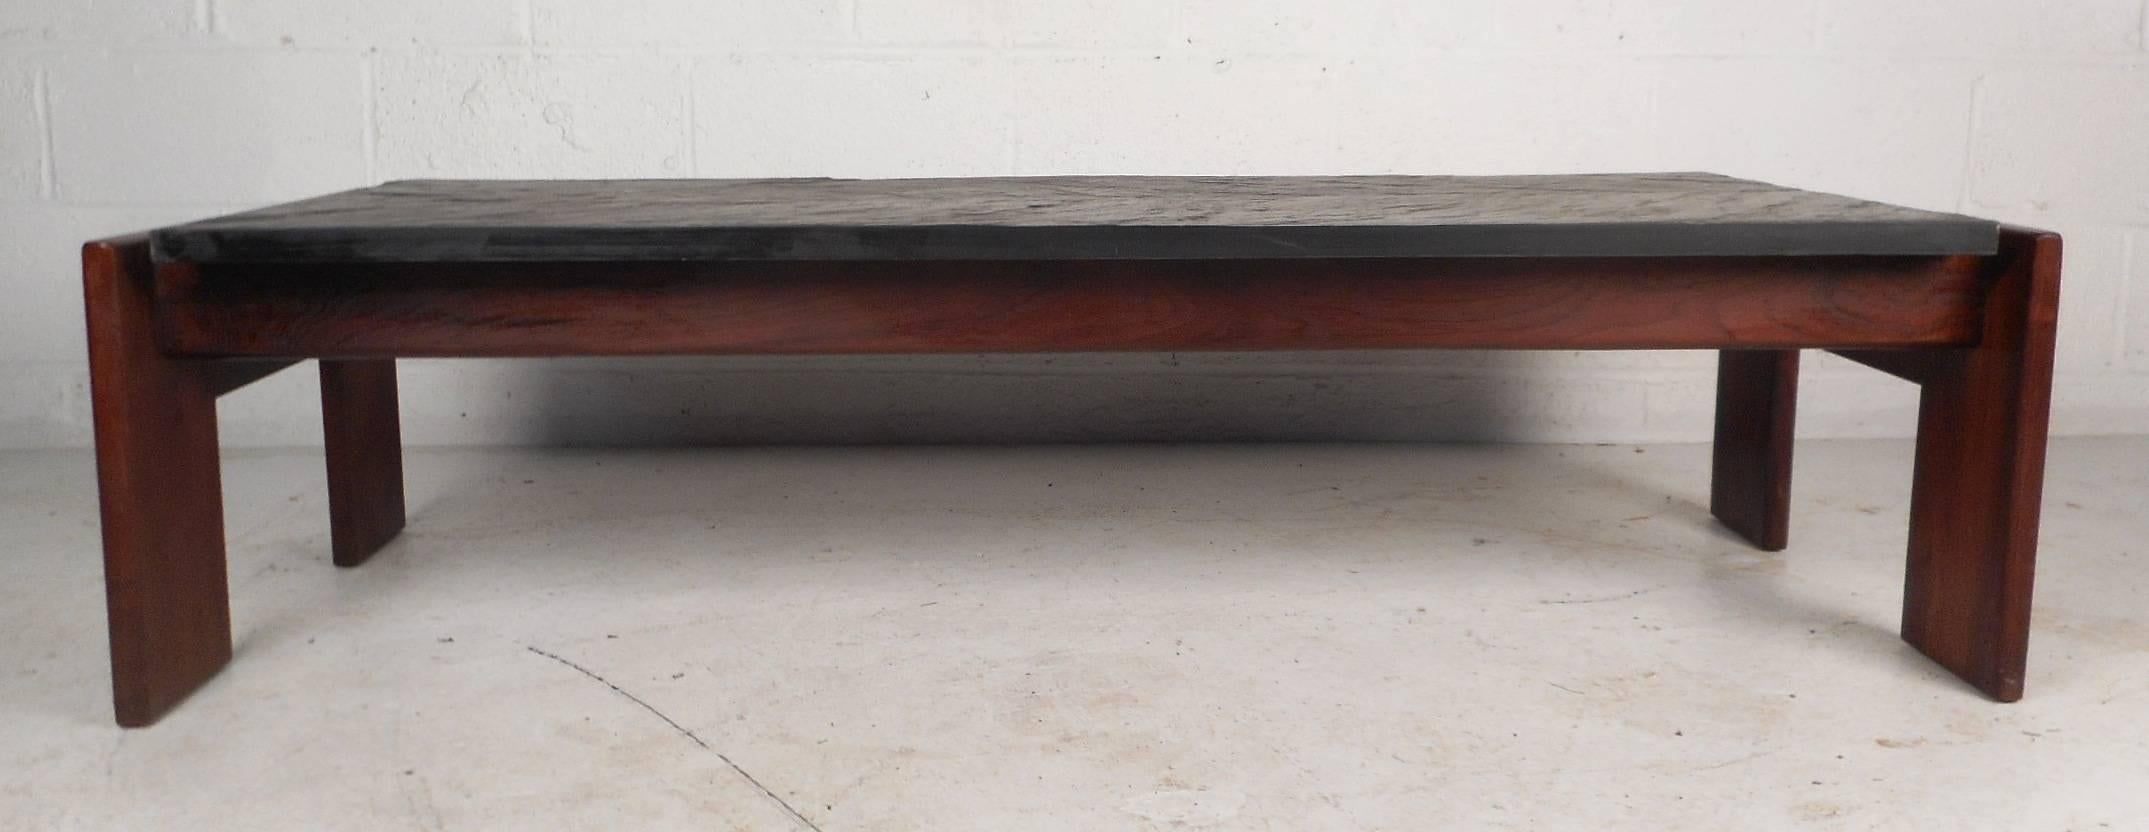 This stunning vintage modern coffee table features a unique floating top design with a solid walnut frame. This beautiful Mid-Century piece has a heavy black slate tabletop with excellent texture. Simple and straight lined design shows true